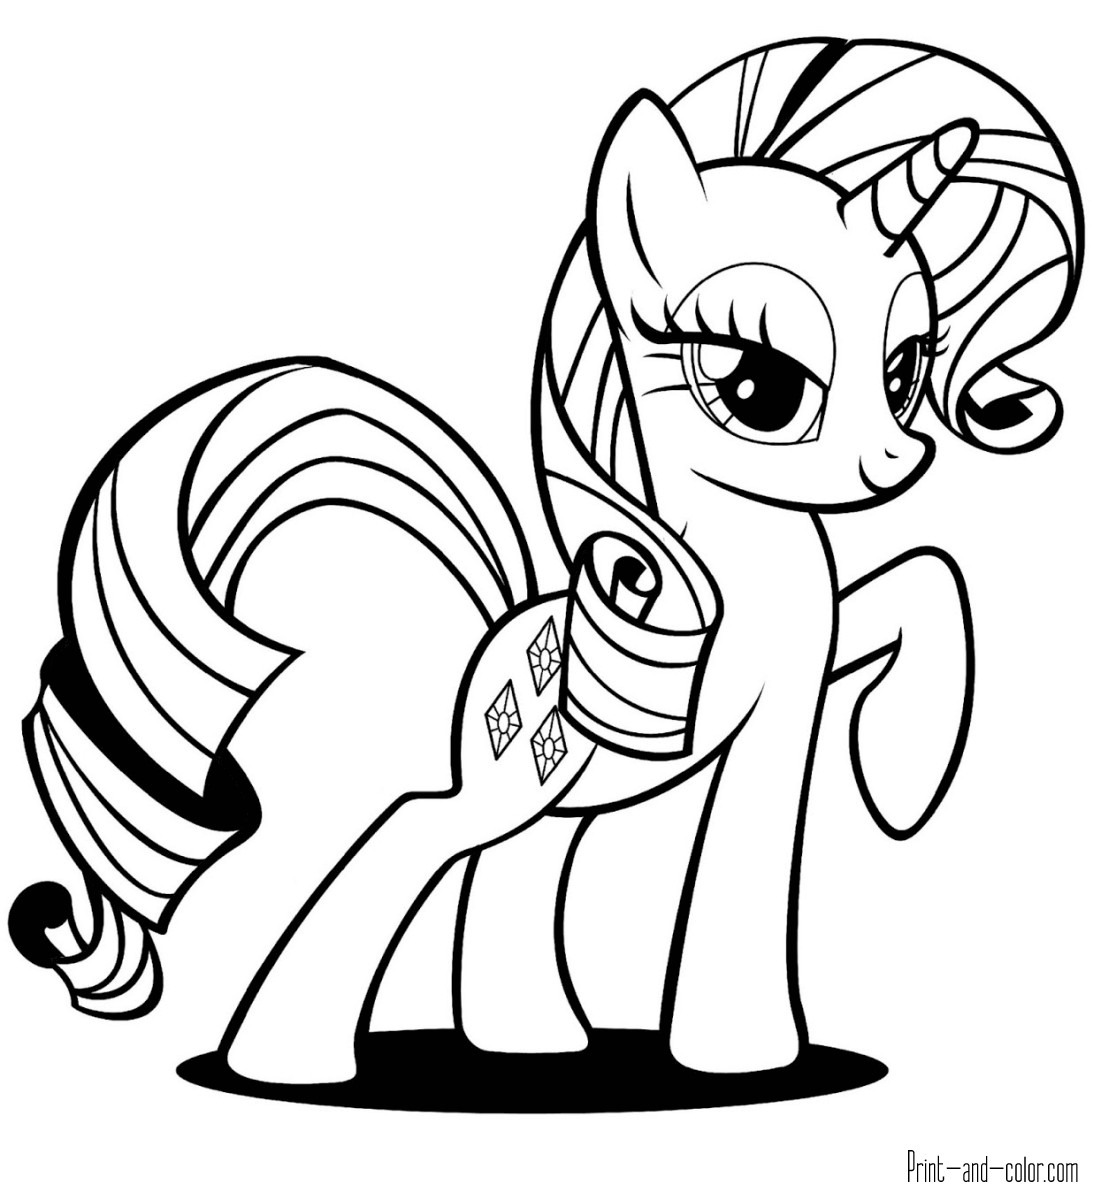 Pony Printable Coloring Pages
 My Little Pony coloring pages